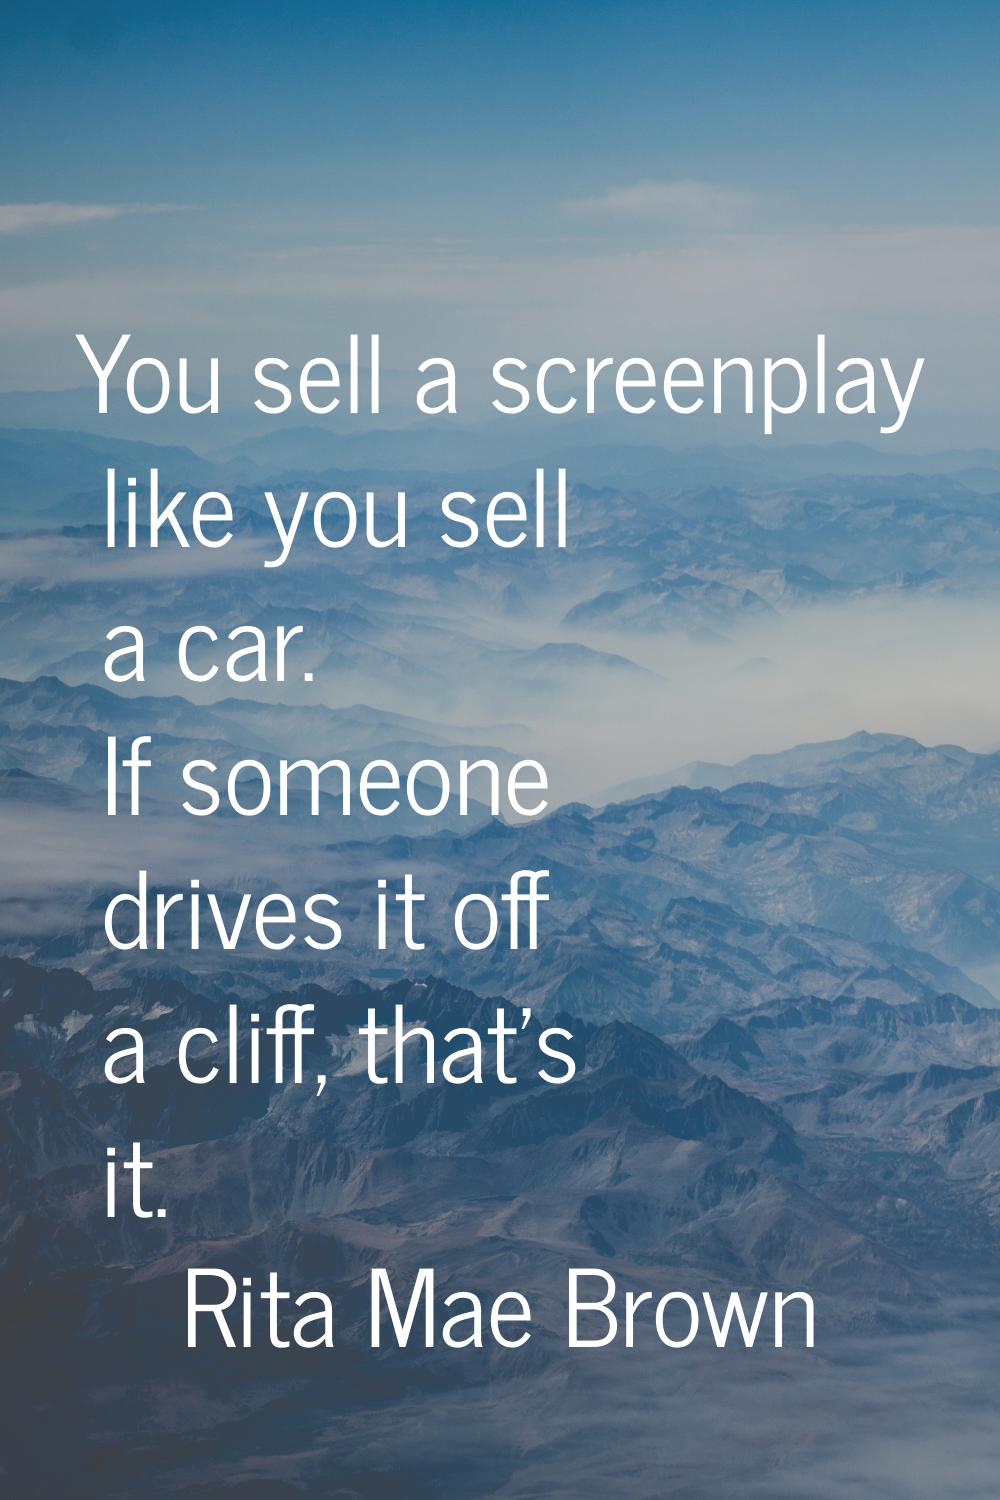 You sell a screenplay like you sell a car. If someone drives it off a cliff, that's it.